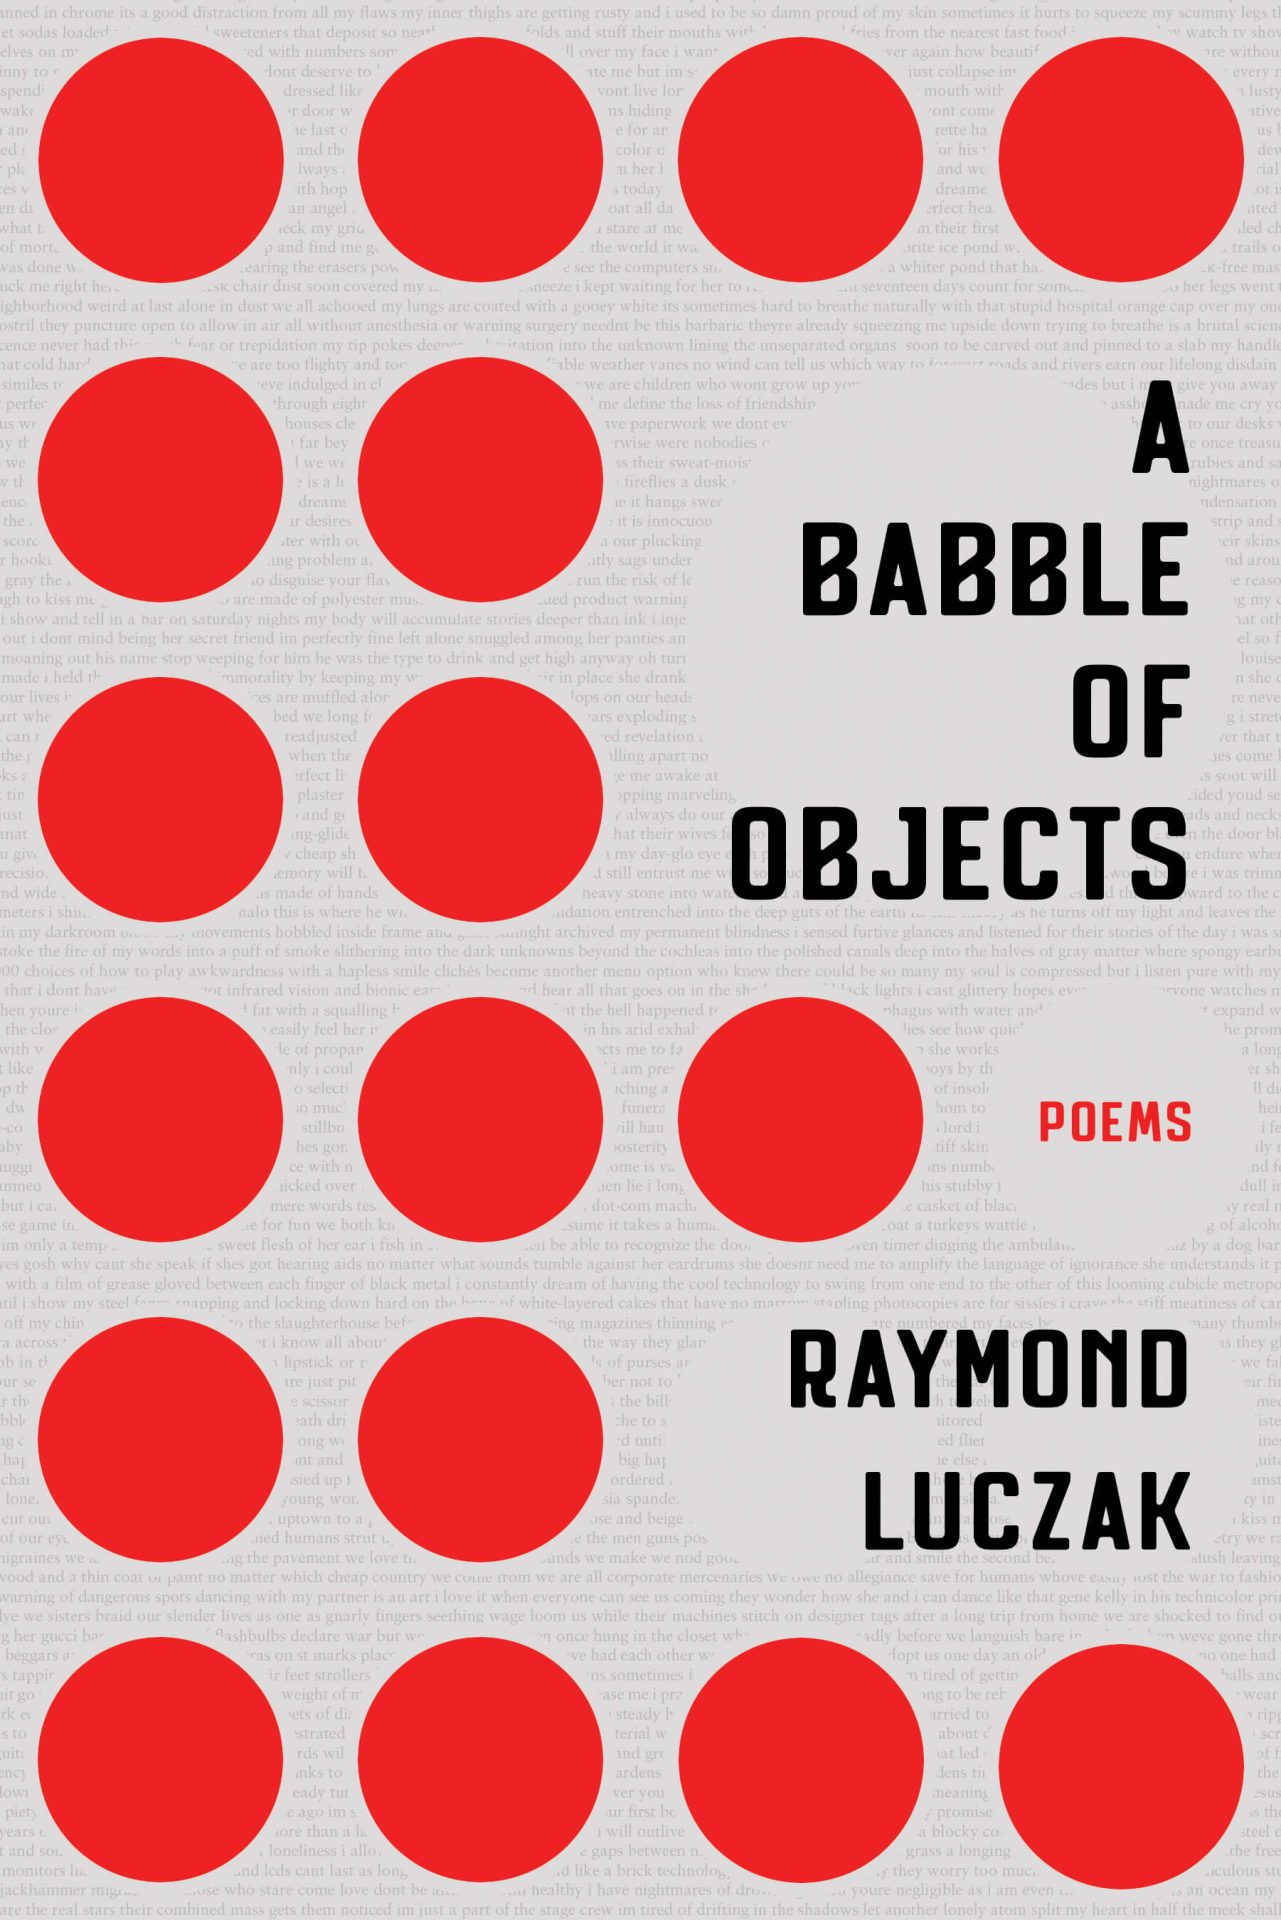 Against a soft gray background, medium-sized red dots are arranged on a grid with the title A BABBLE OF OBJECTS in black, the subtitle POEMS in red, and the author's name RAYMOND LUCZAK in black.